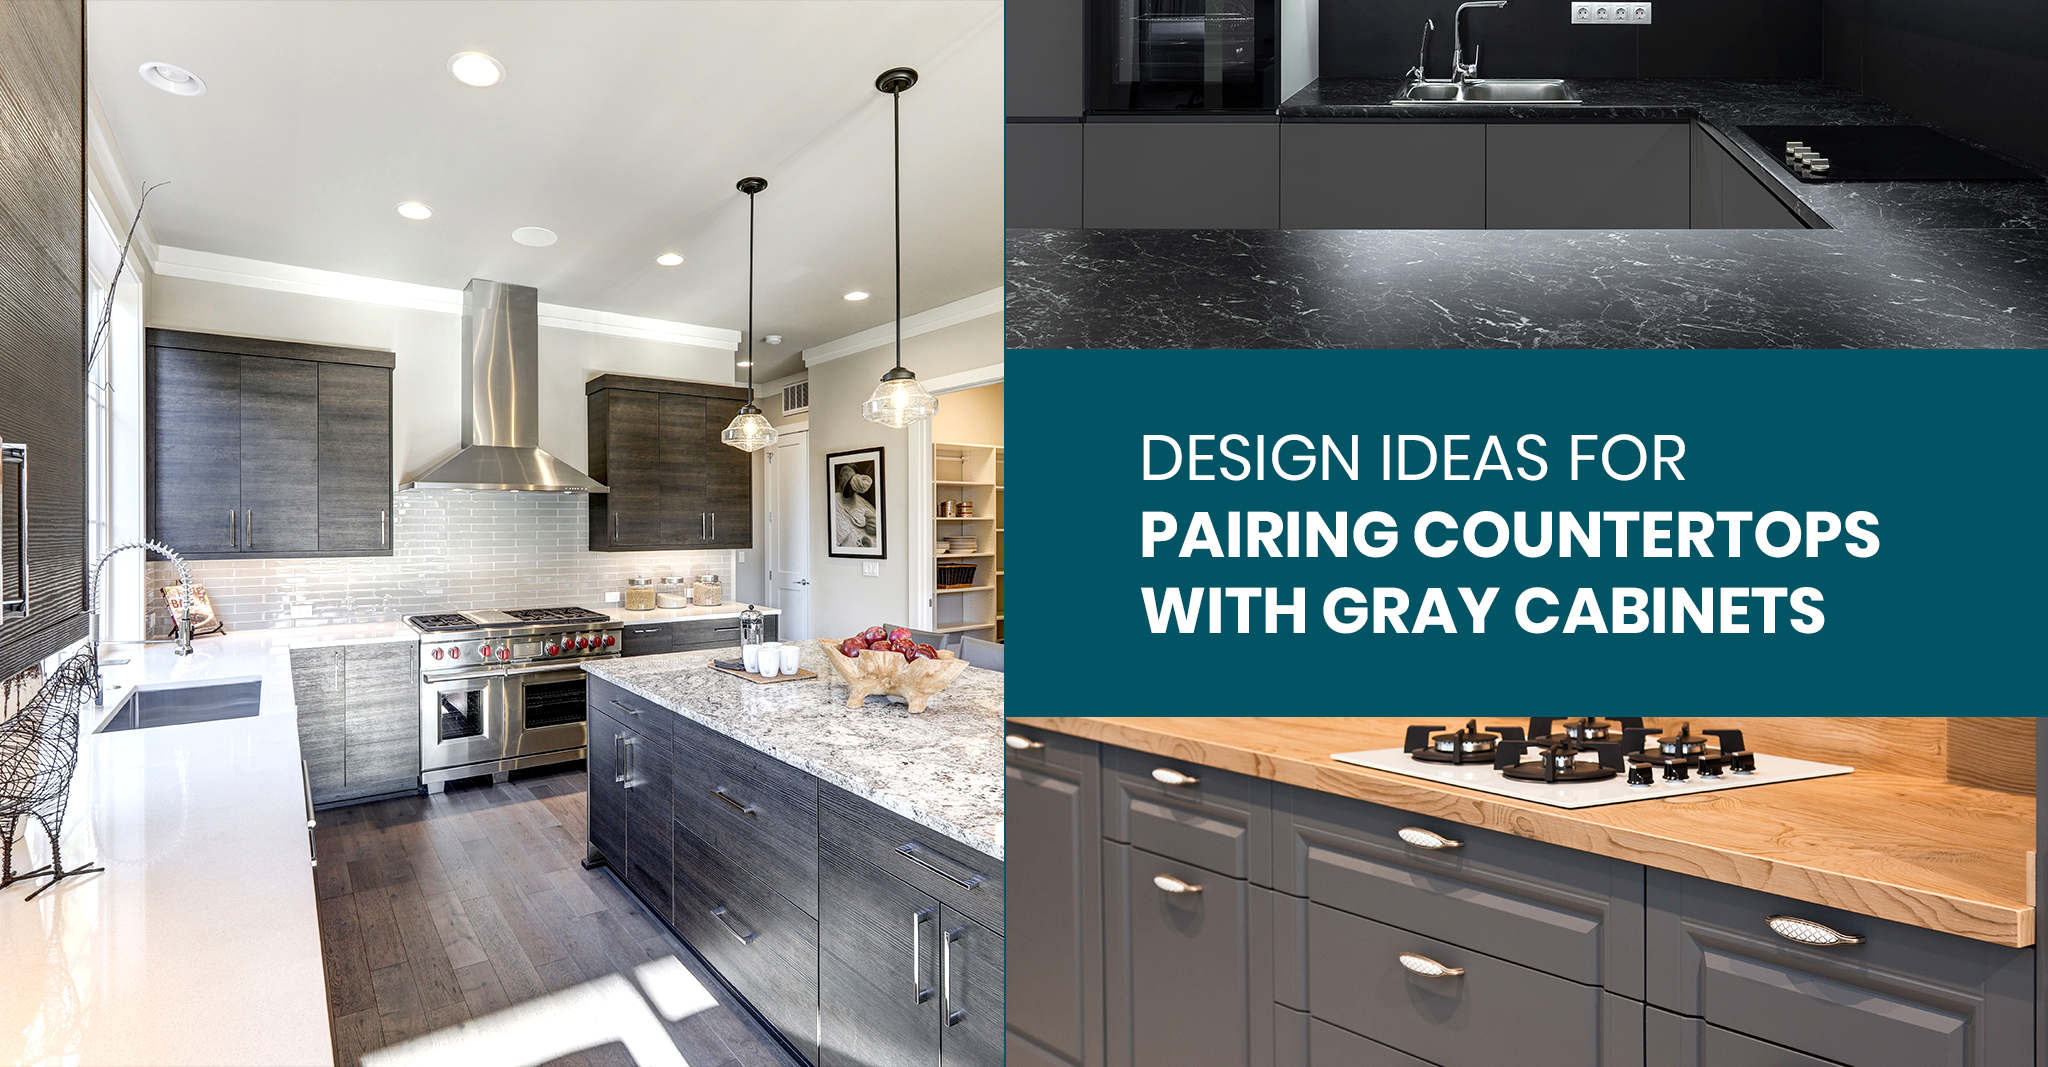 Design Ideas for Pairing Countertops with Gray Cabinets - Simply Kitchens